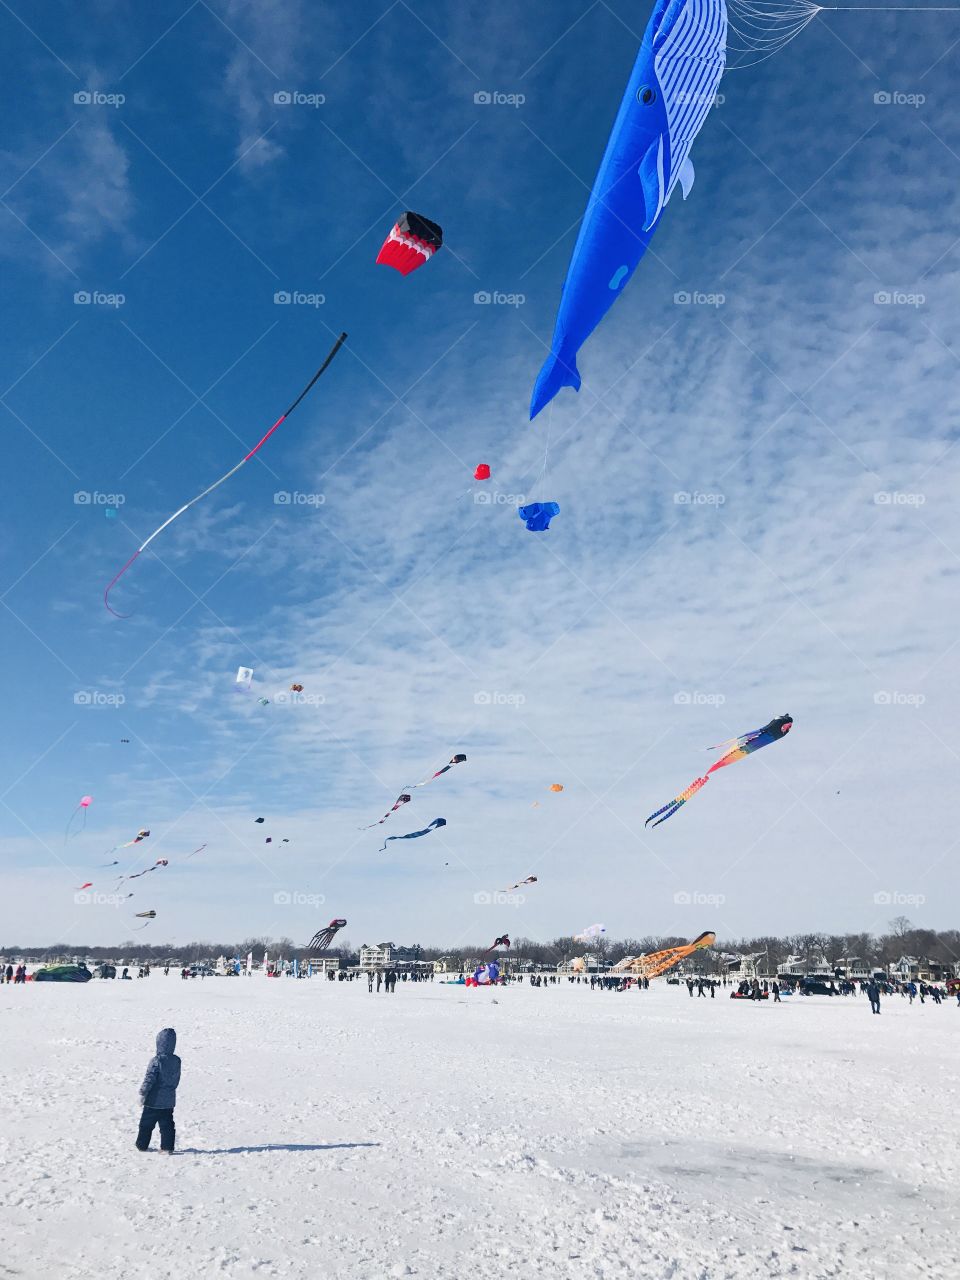 Cold stark winter time with snow covered surfaces making everything look white! Kites time!! 